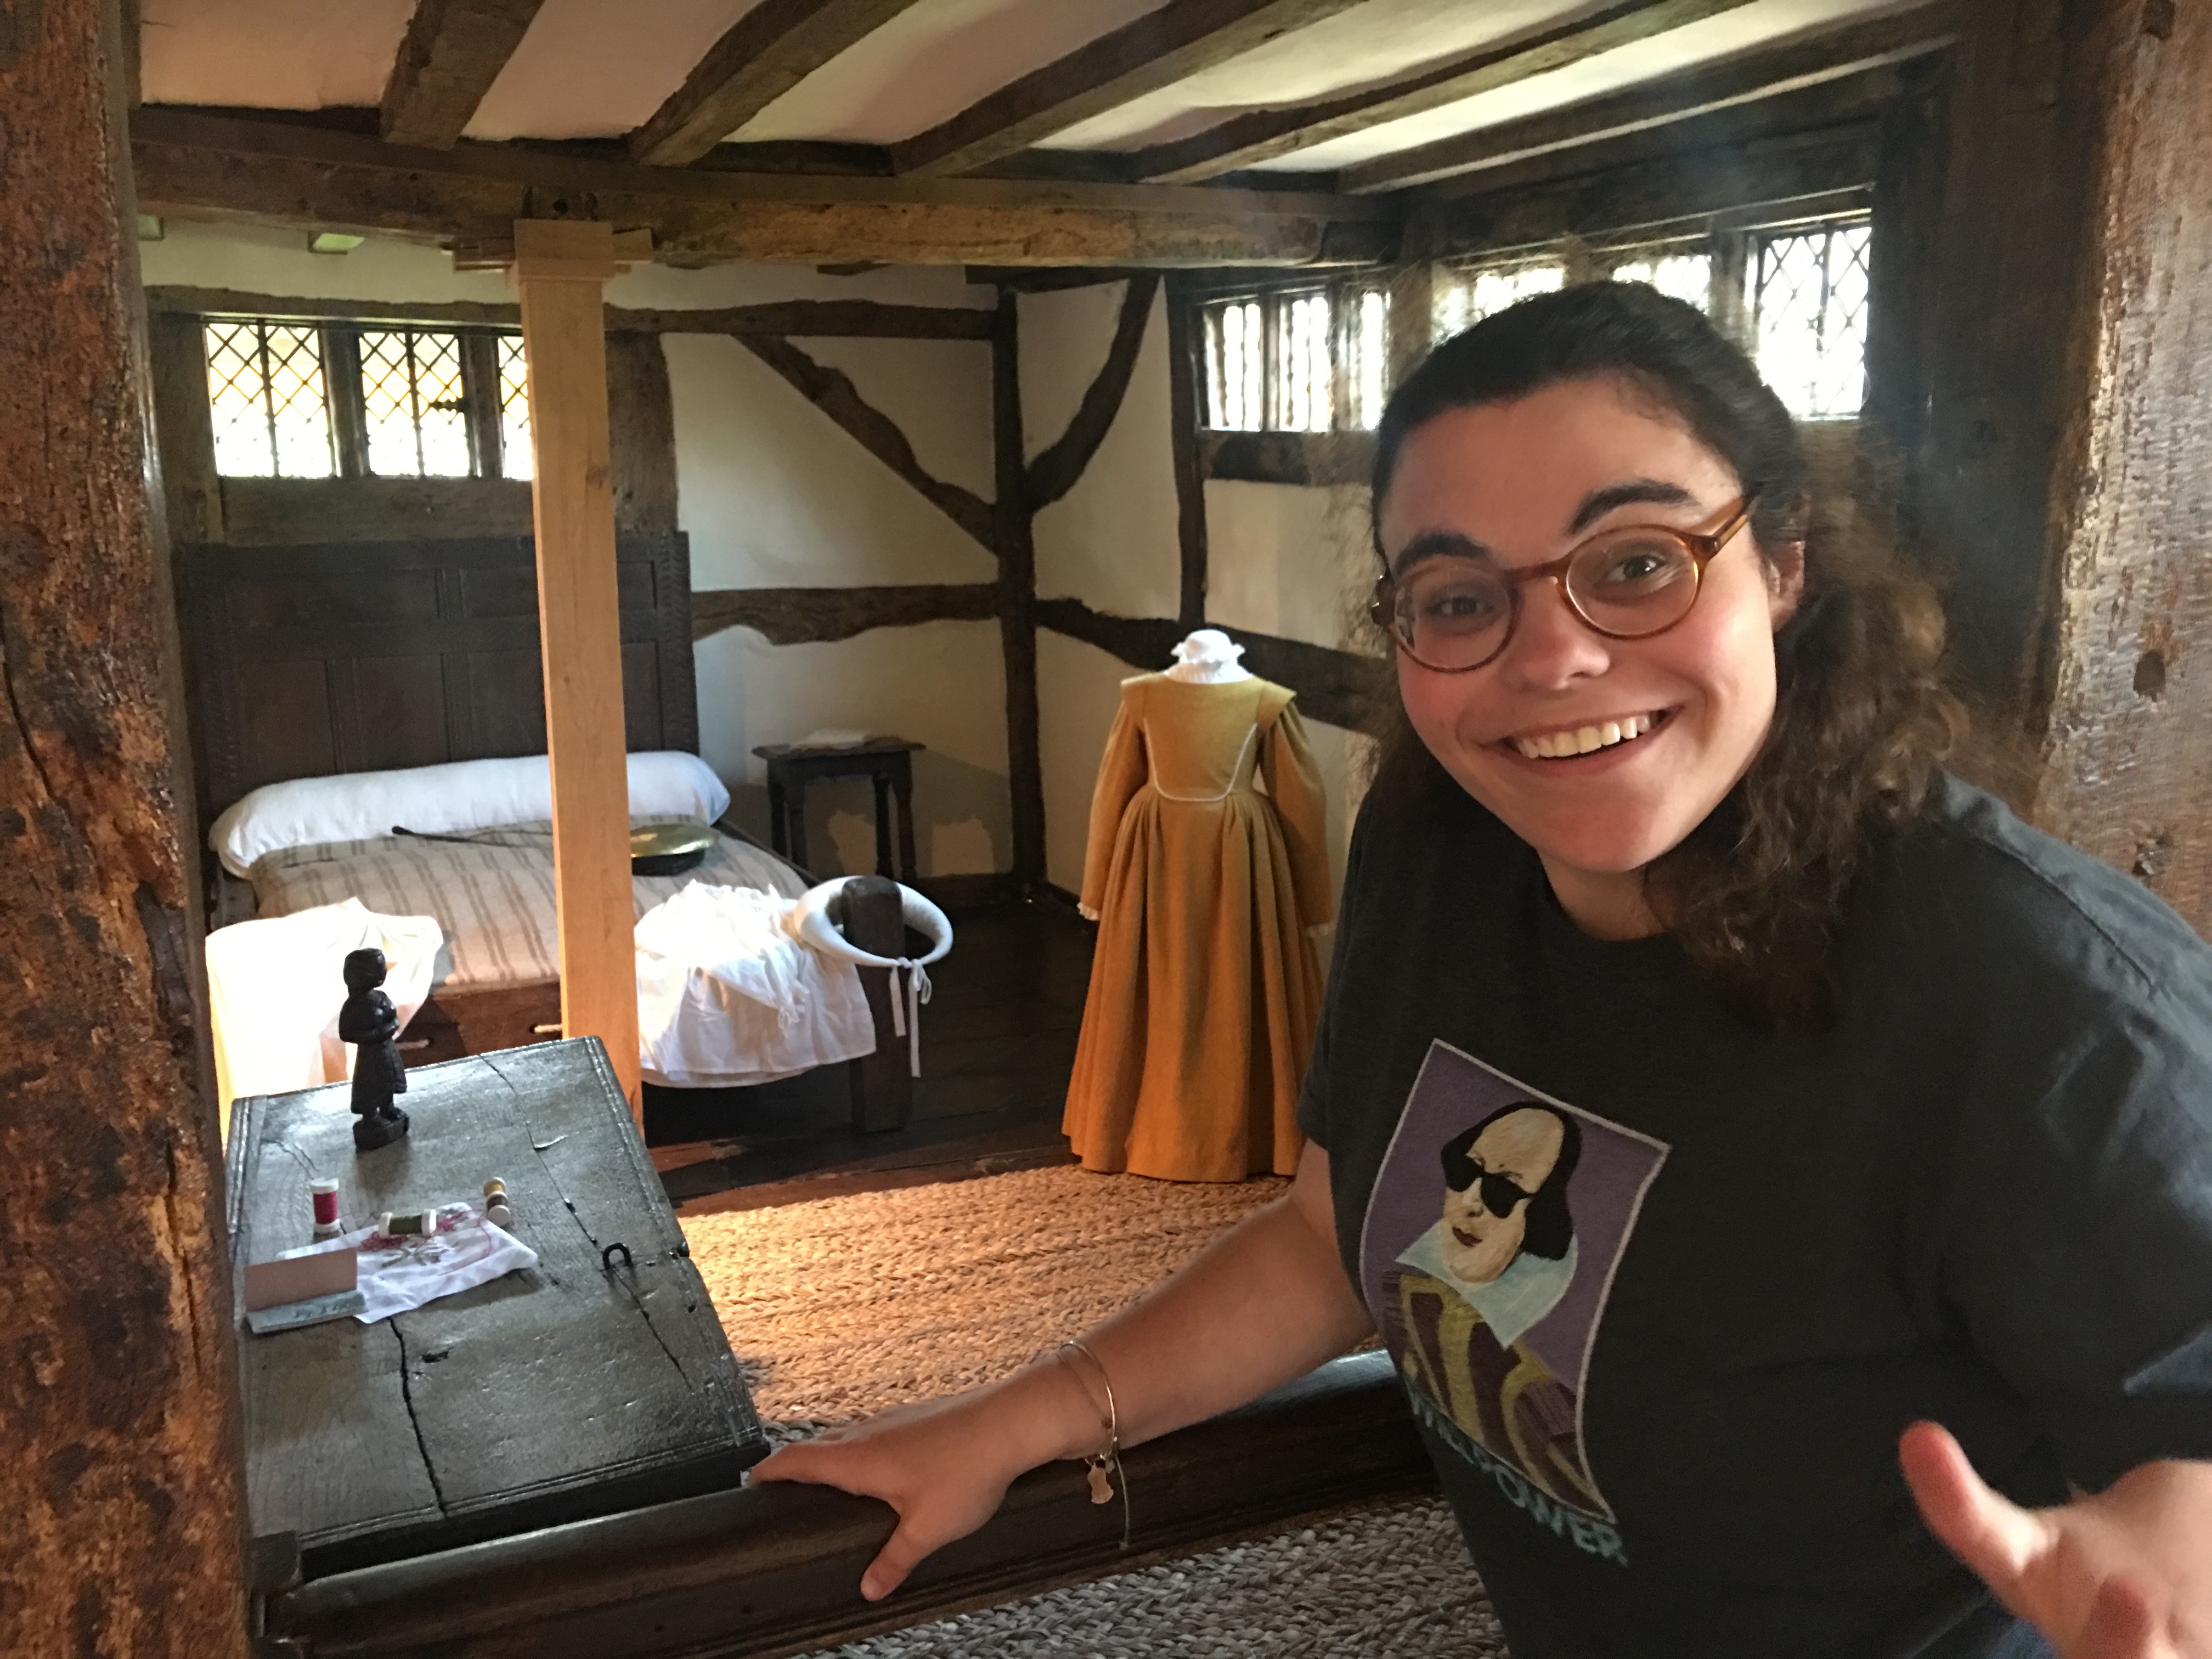 alt="Enjoying Shakespeare's birthplace and humbled that someone of little means could make such an impact"